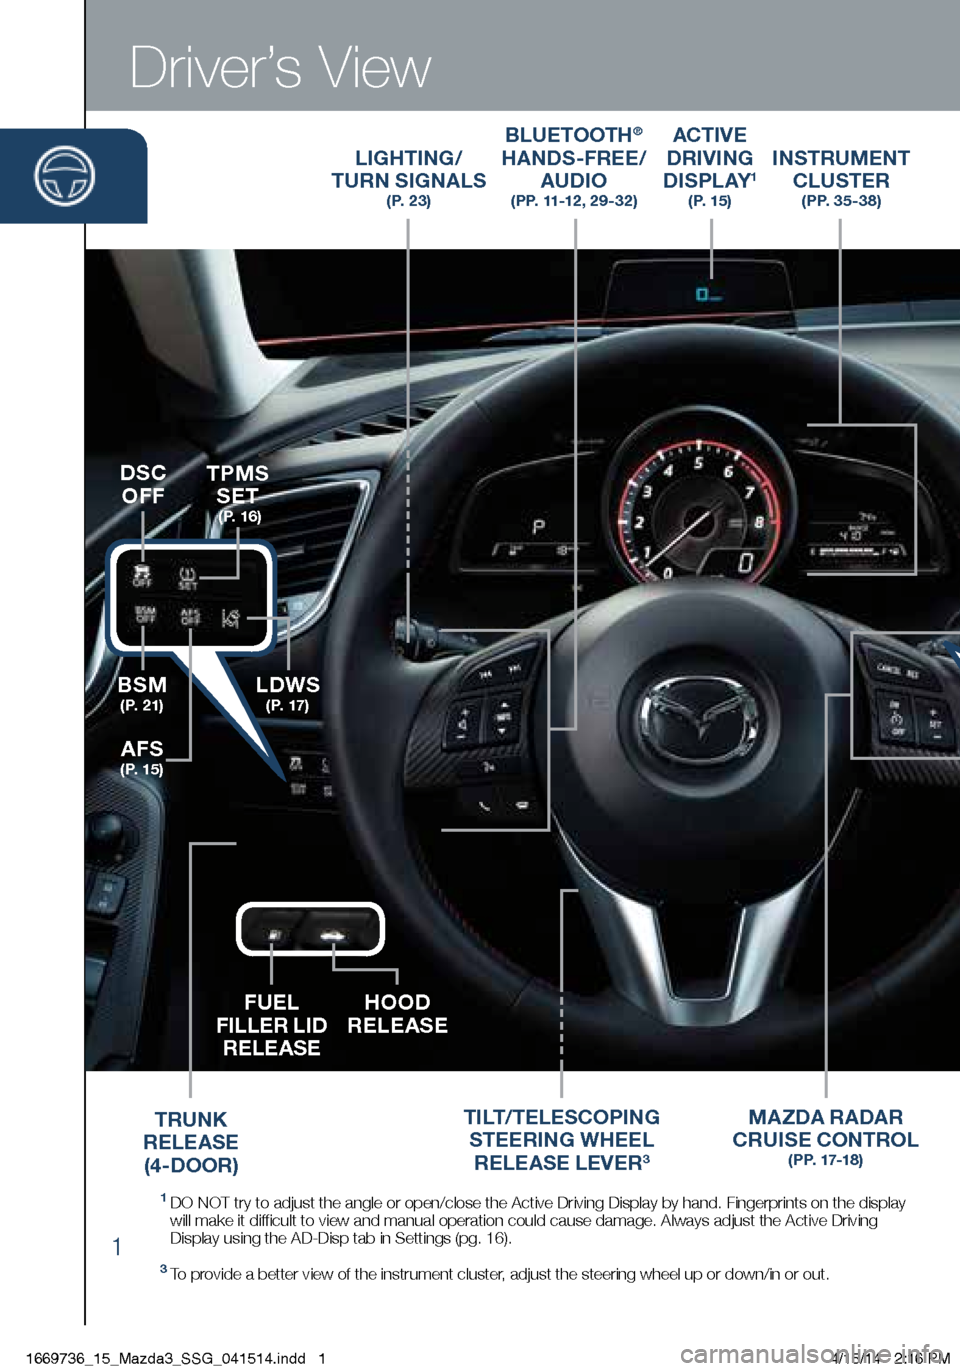 MAZDA MODEL 3 HATCHBACK 2014  Smart Start Guide (in English) 1
Driver’s View
LIGHTING/  
TURN SIGNALS  
( P.  2 3 )
BLUETOOTH®  
HANDS-FREE/  
AUDIO
   (PP. 11-12 , 29-32)
ACTIVE  
DRIVING  
D I S P L AY
1   ( P.  1 5 )
TILT/TELESCOPING  
STEERING WHEEL  
RE